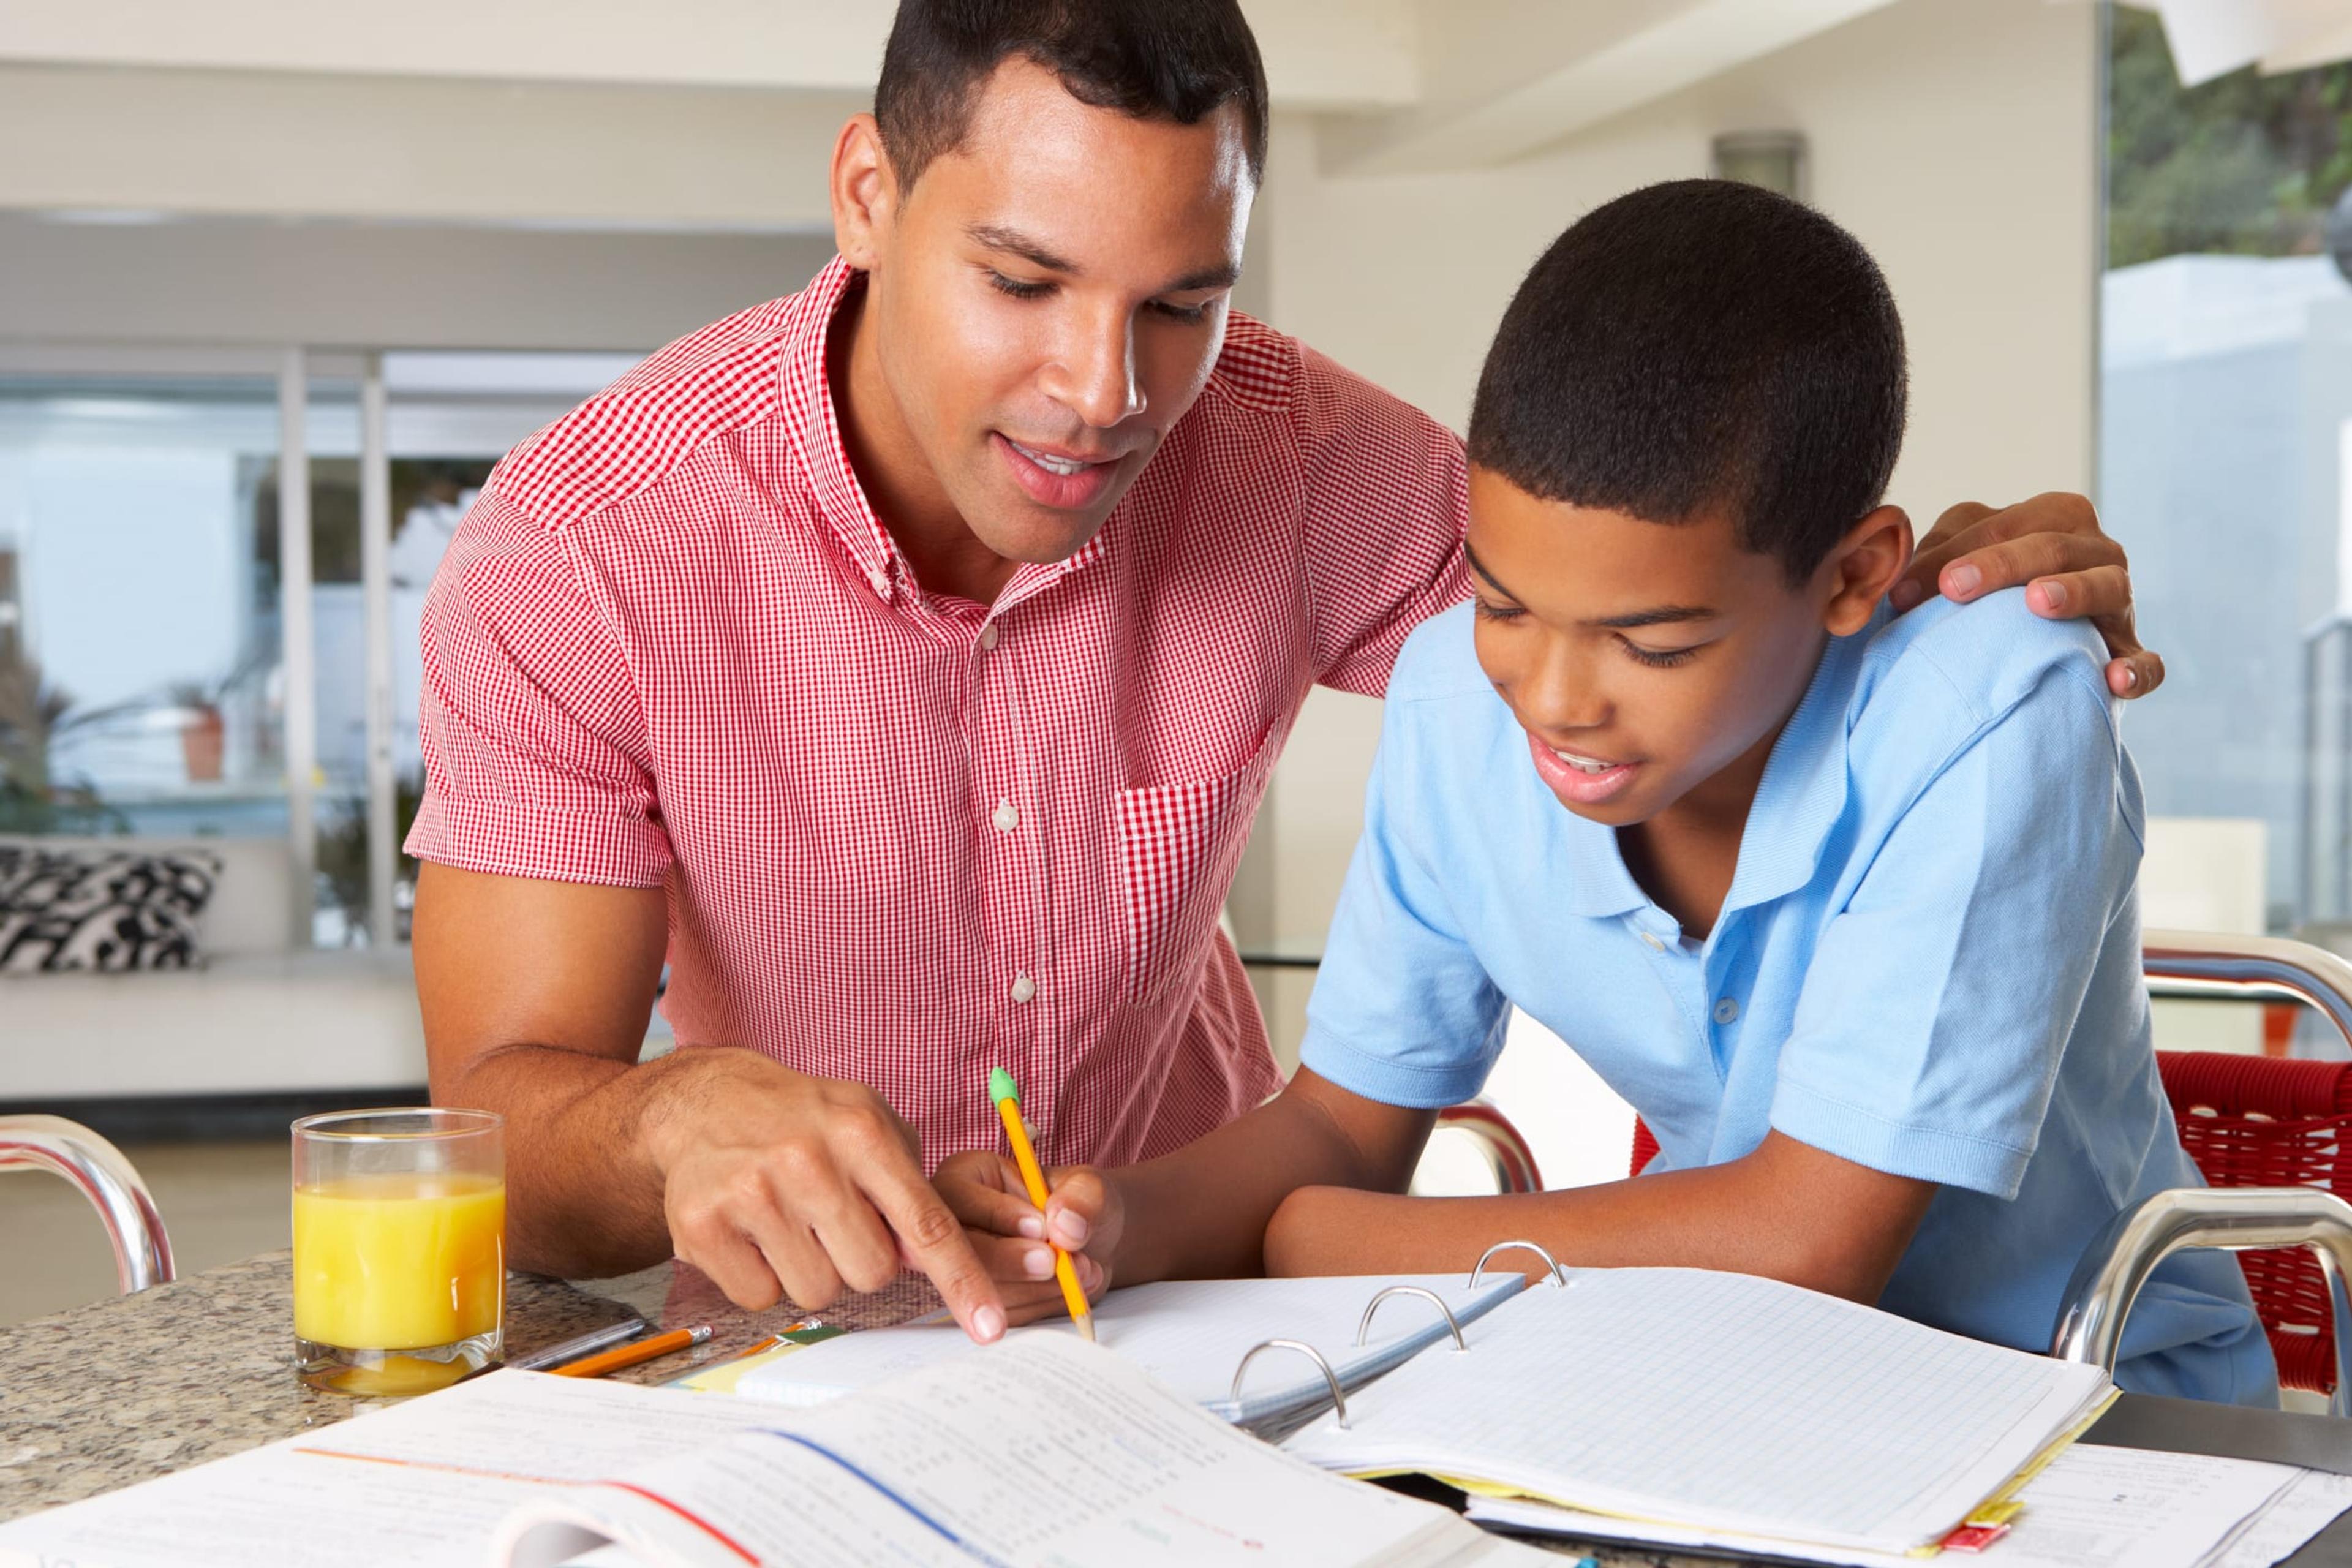 Father helps his son in the kitchen with homework